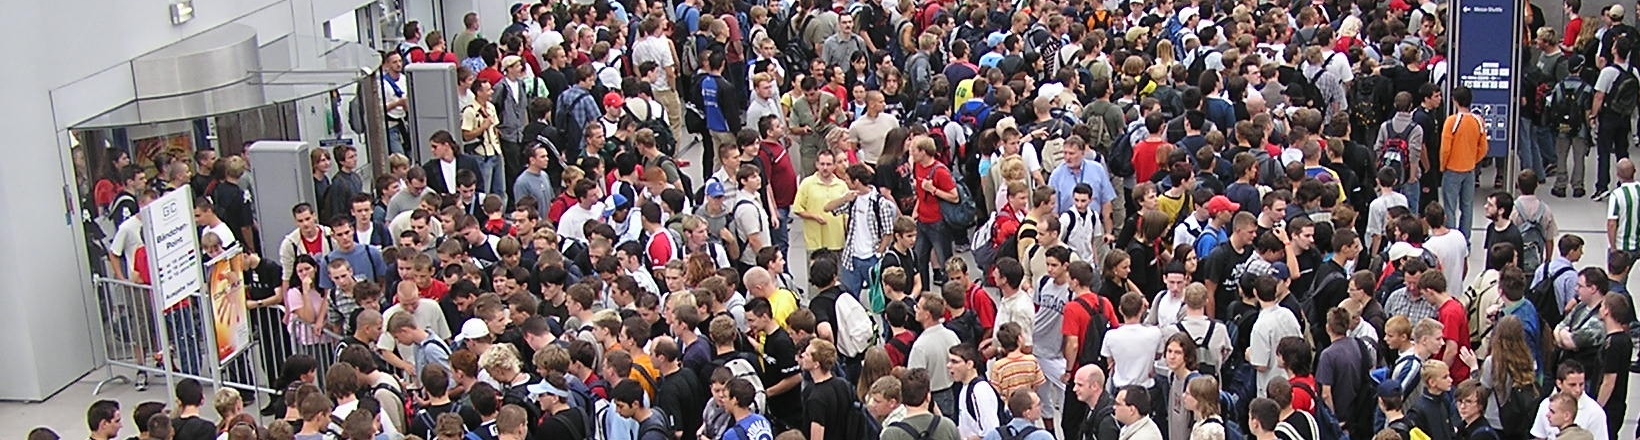 Large crowd of people in a building